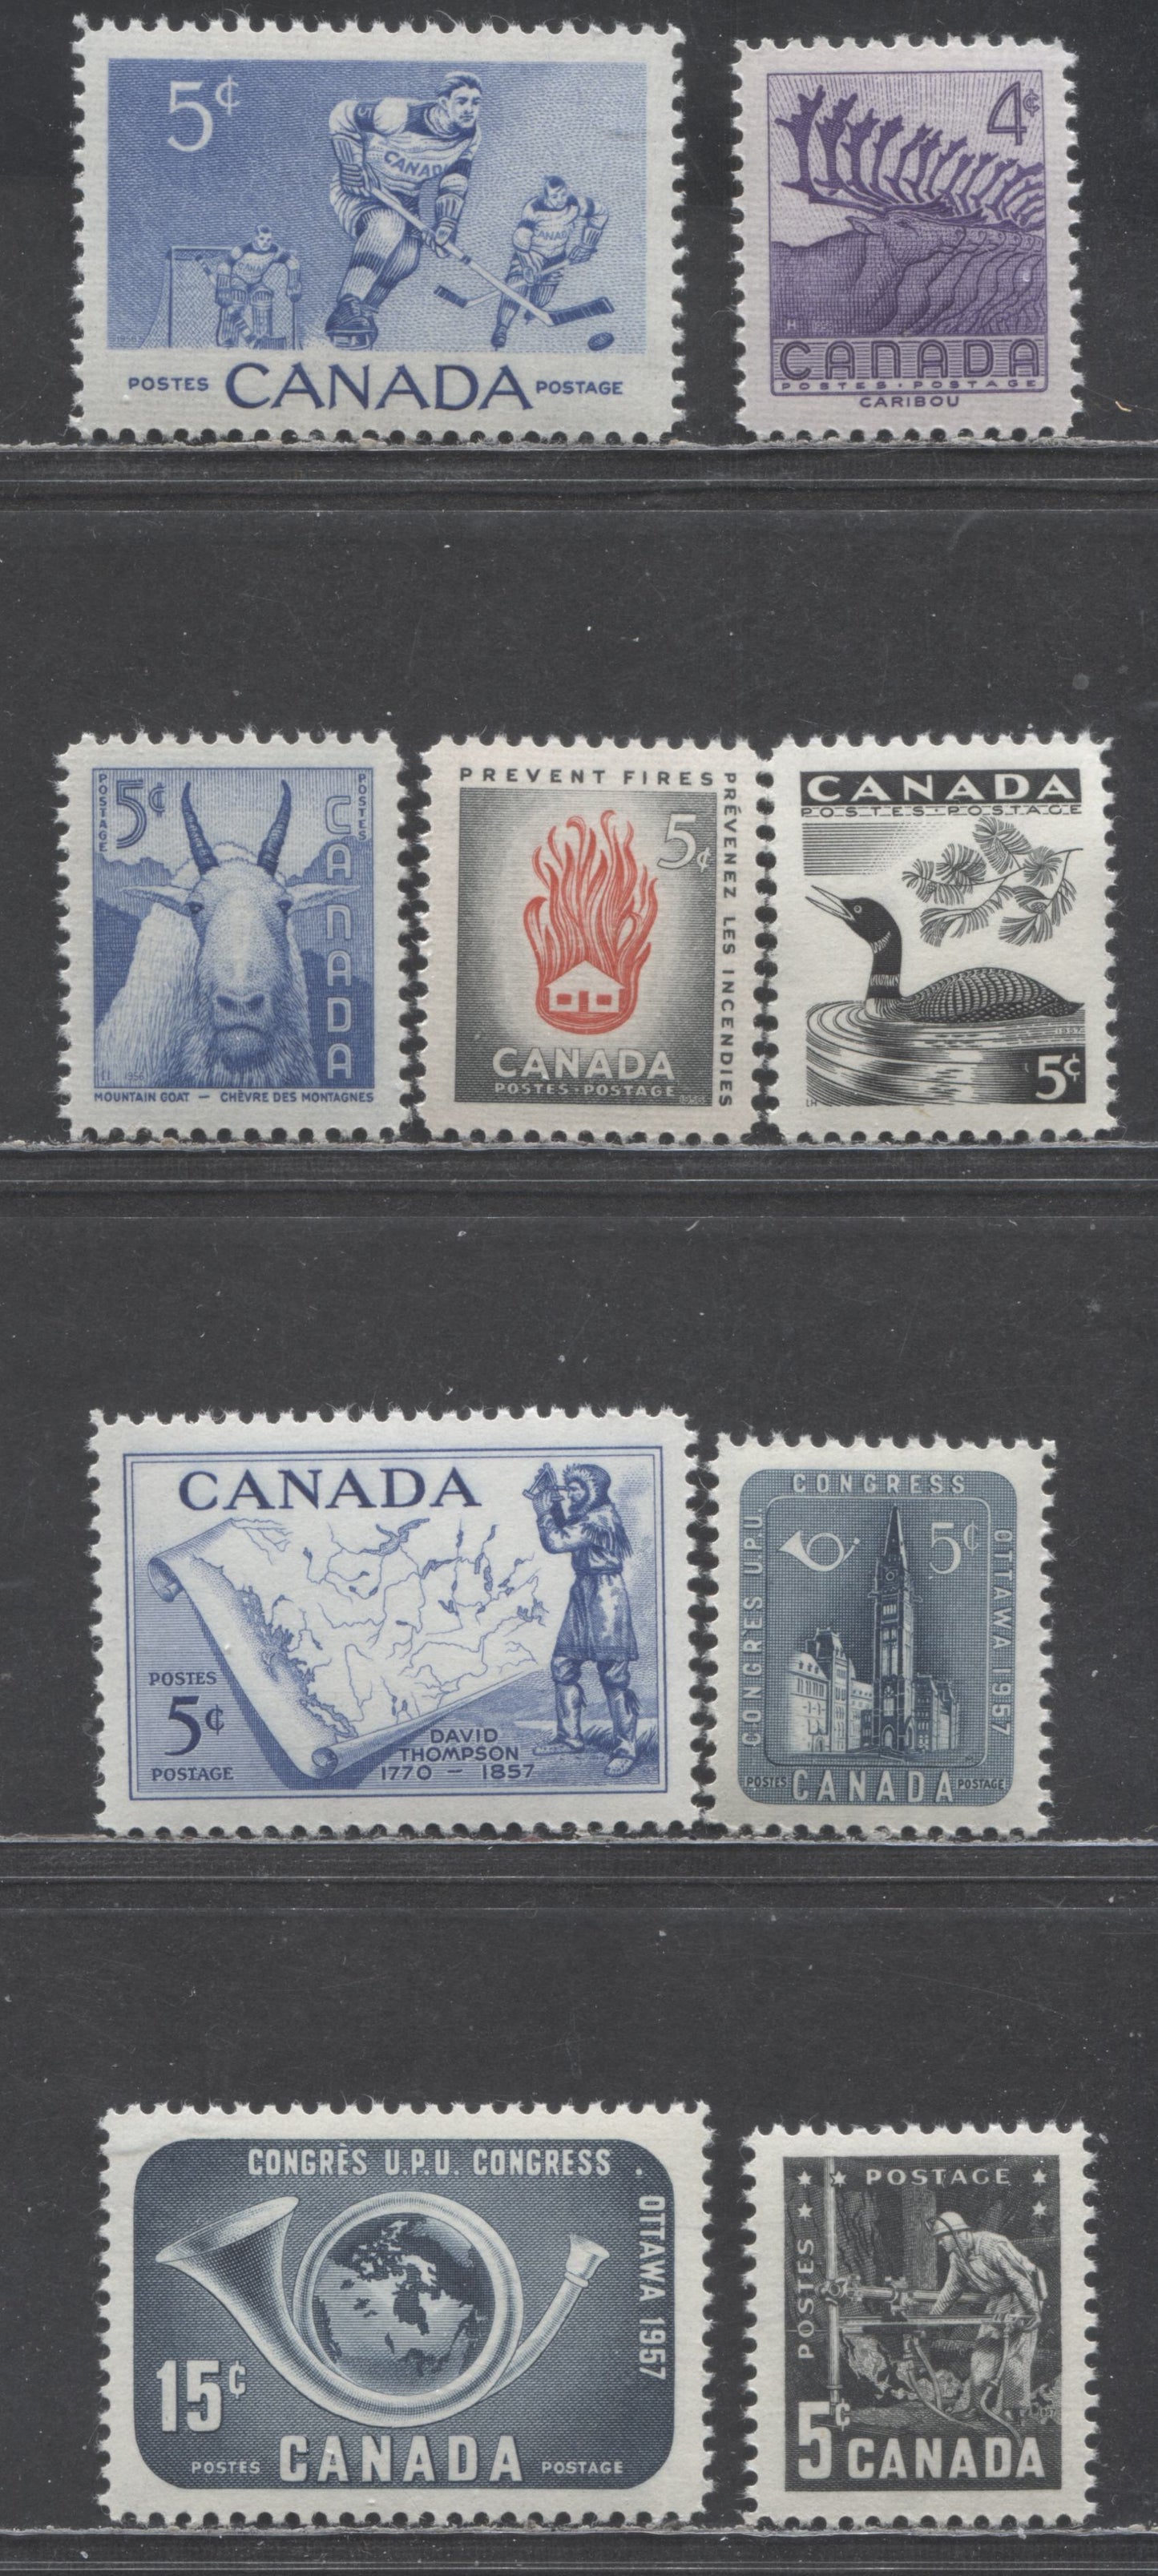 Canada #359-361, 364, 369-372 5c Various Colours Various Subjects, 1956 Hockey - 1957 Mining Congress Issues, 9 VFNH Singles, Smooth & Horiziontally Ribbed Papers, Streaky & Smooth Cream Semi-Gloss Gum All Selected For Centering